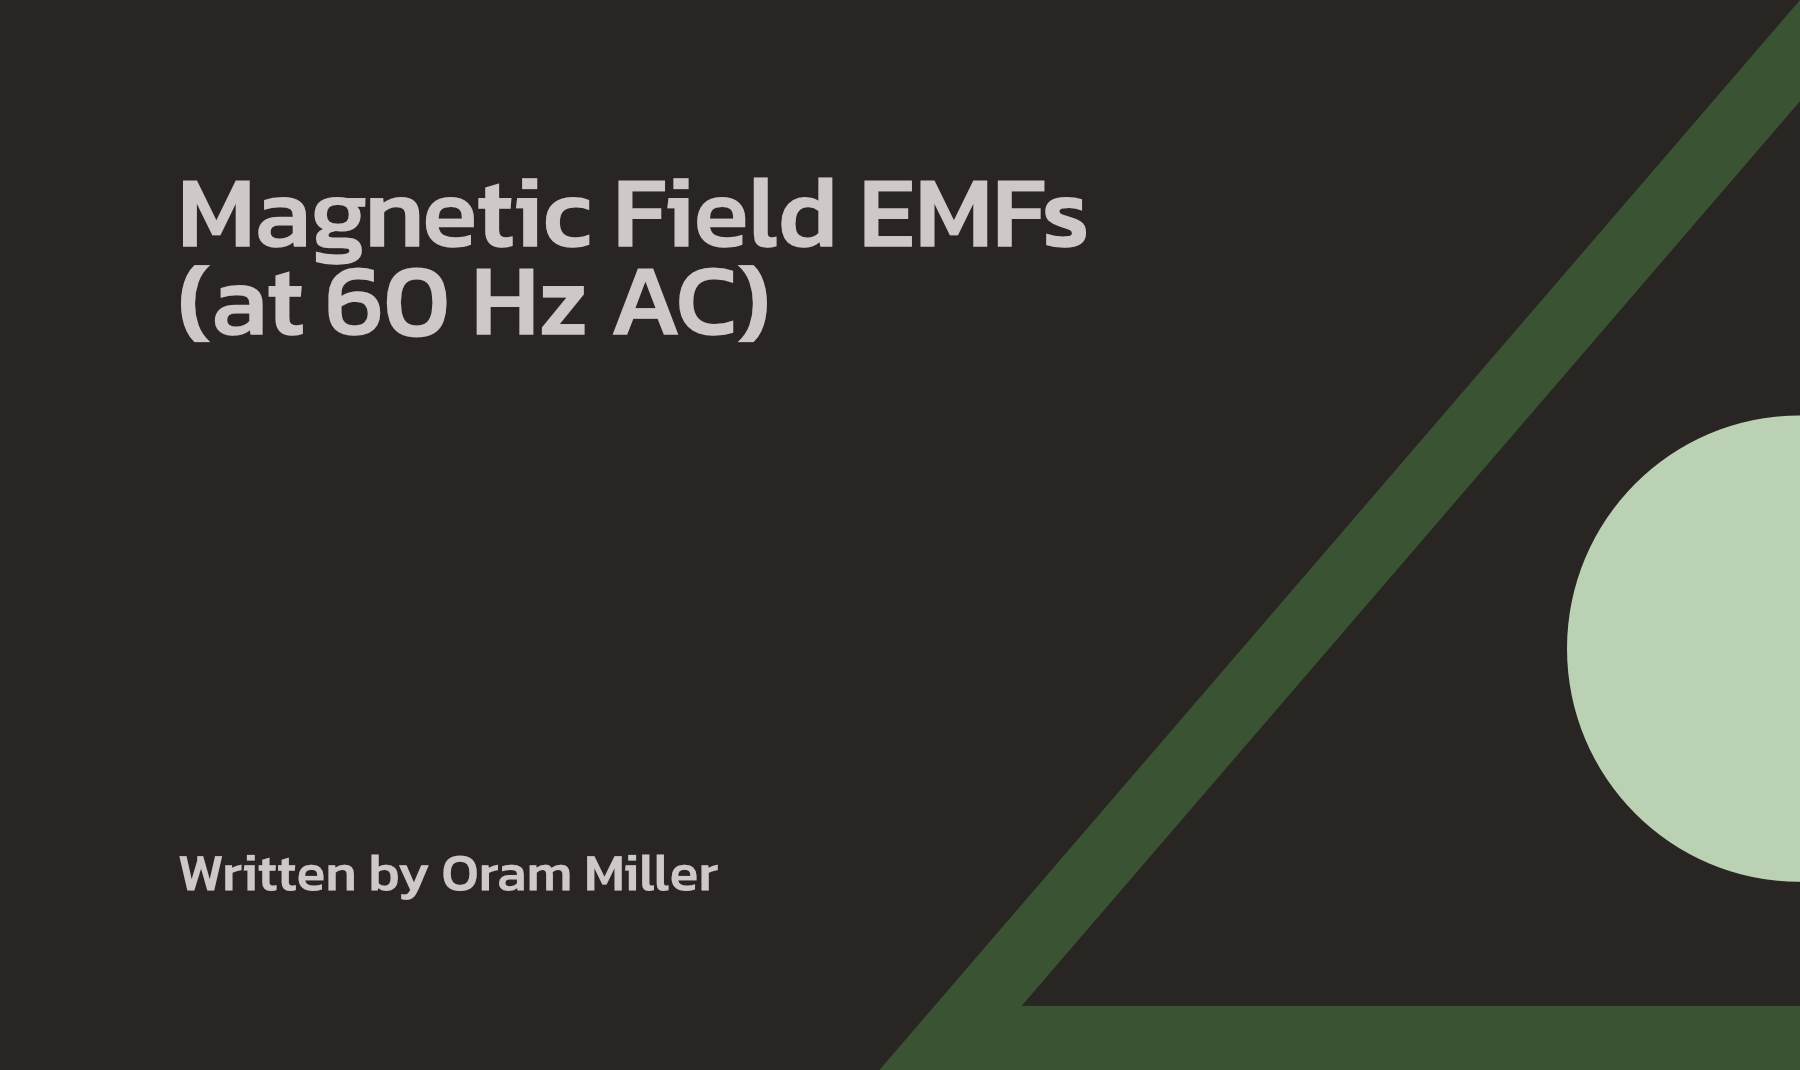 Magnetic Field EMFs (at 60 Hz AC)